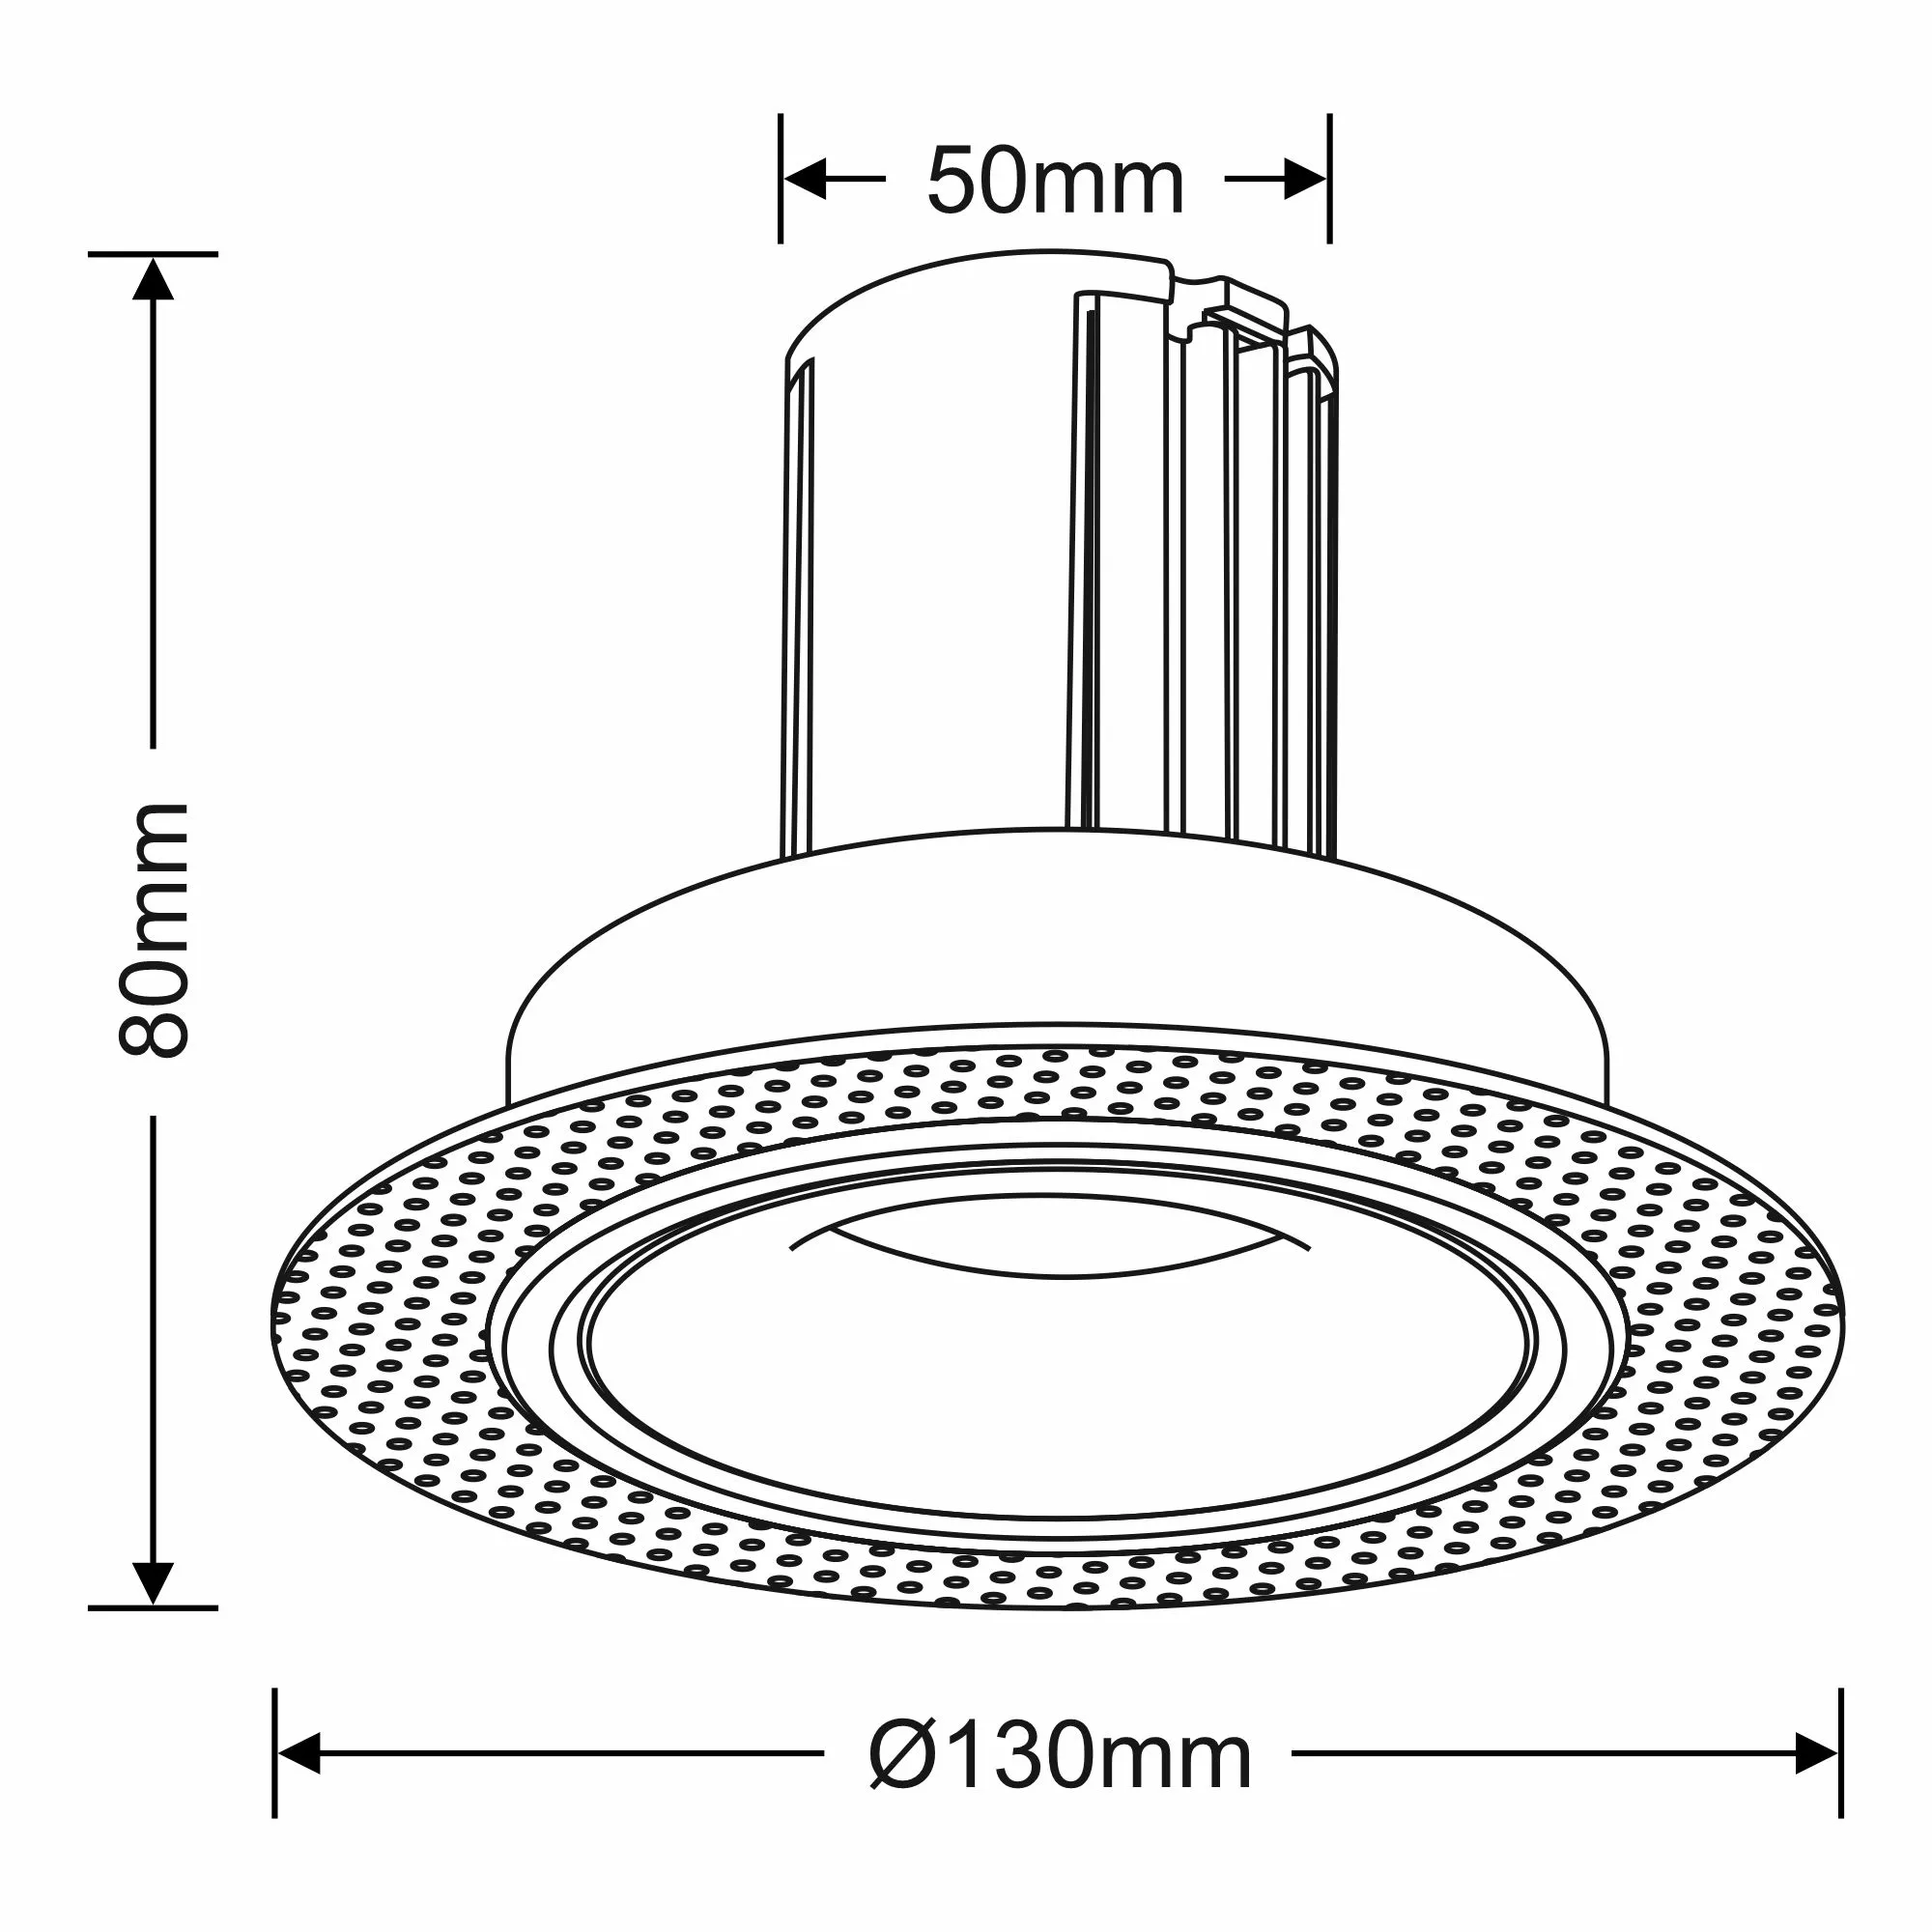 DM202069  Bolor T 9 Tridonic Powered 9W 3000K 840lm 36° CRI>90 LED Engine White/White Trimless Fixed Recessed Spotlight; IP20